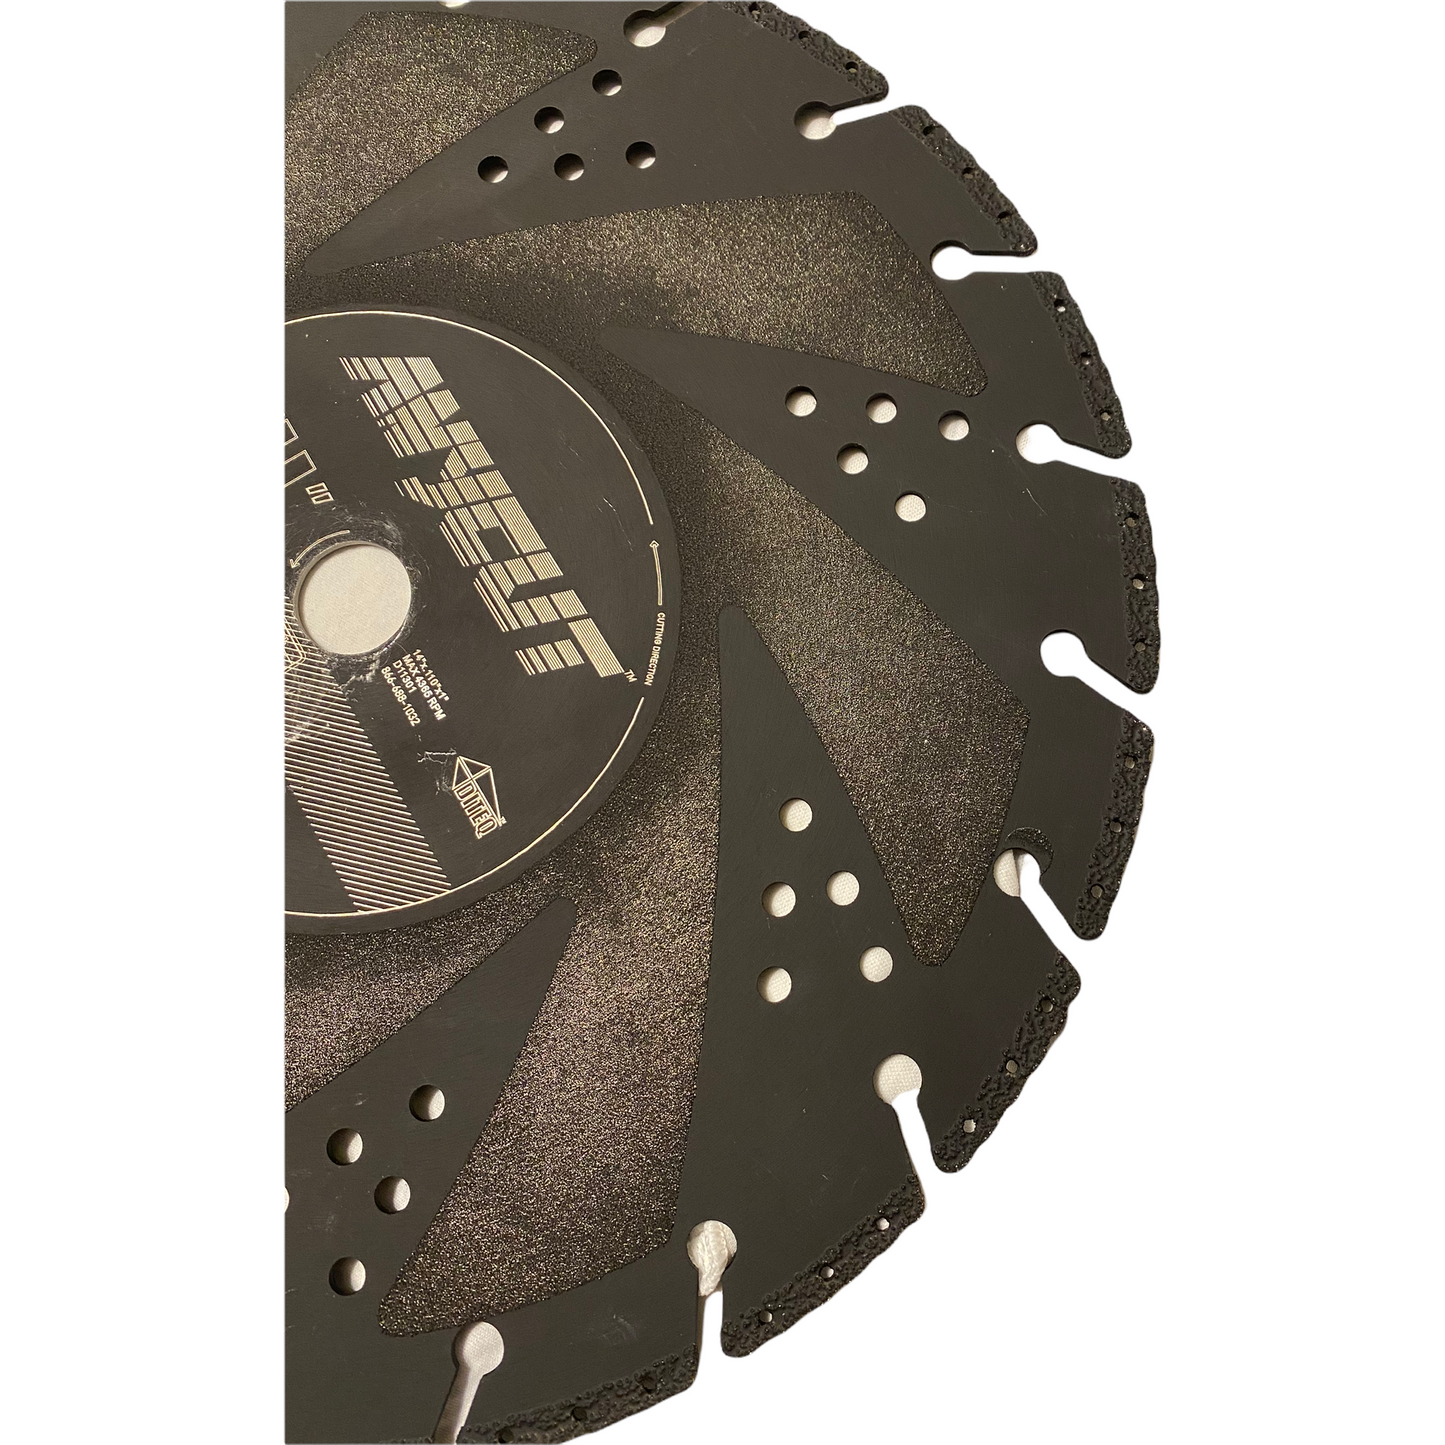 14” Anycut Diamond Blade Solid Steel Saw Blade for Concrete Steel Ductile Iron Pipe - 3 Pack